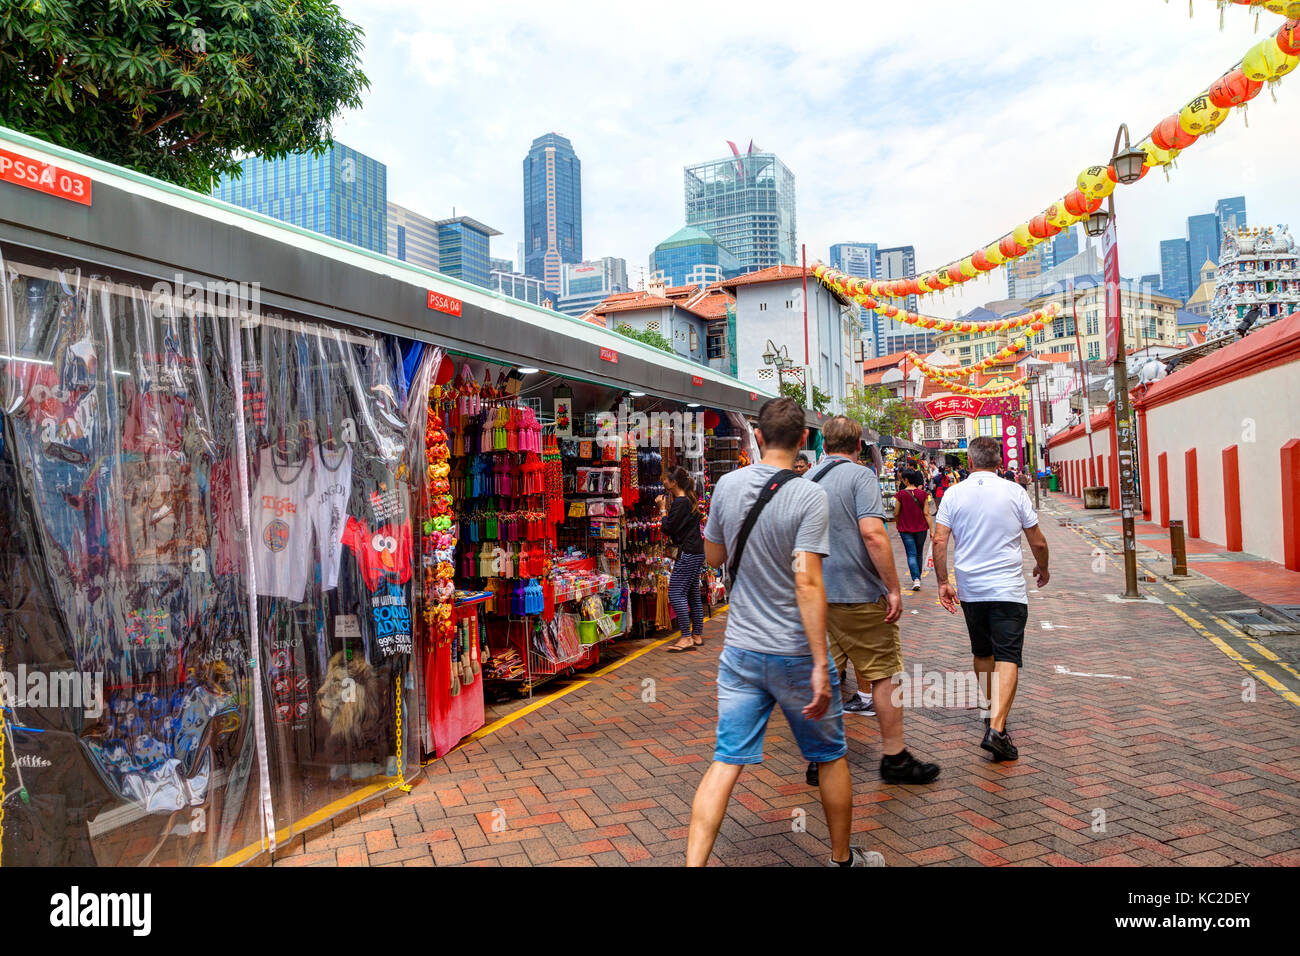 SINGAPORE - SEPTEMBER 11, 2017: Shoppers visiting Chinatown for bargain souvenirs and authentic local food. The old Victorian-style shophouses are a t Stock Photo